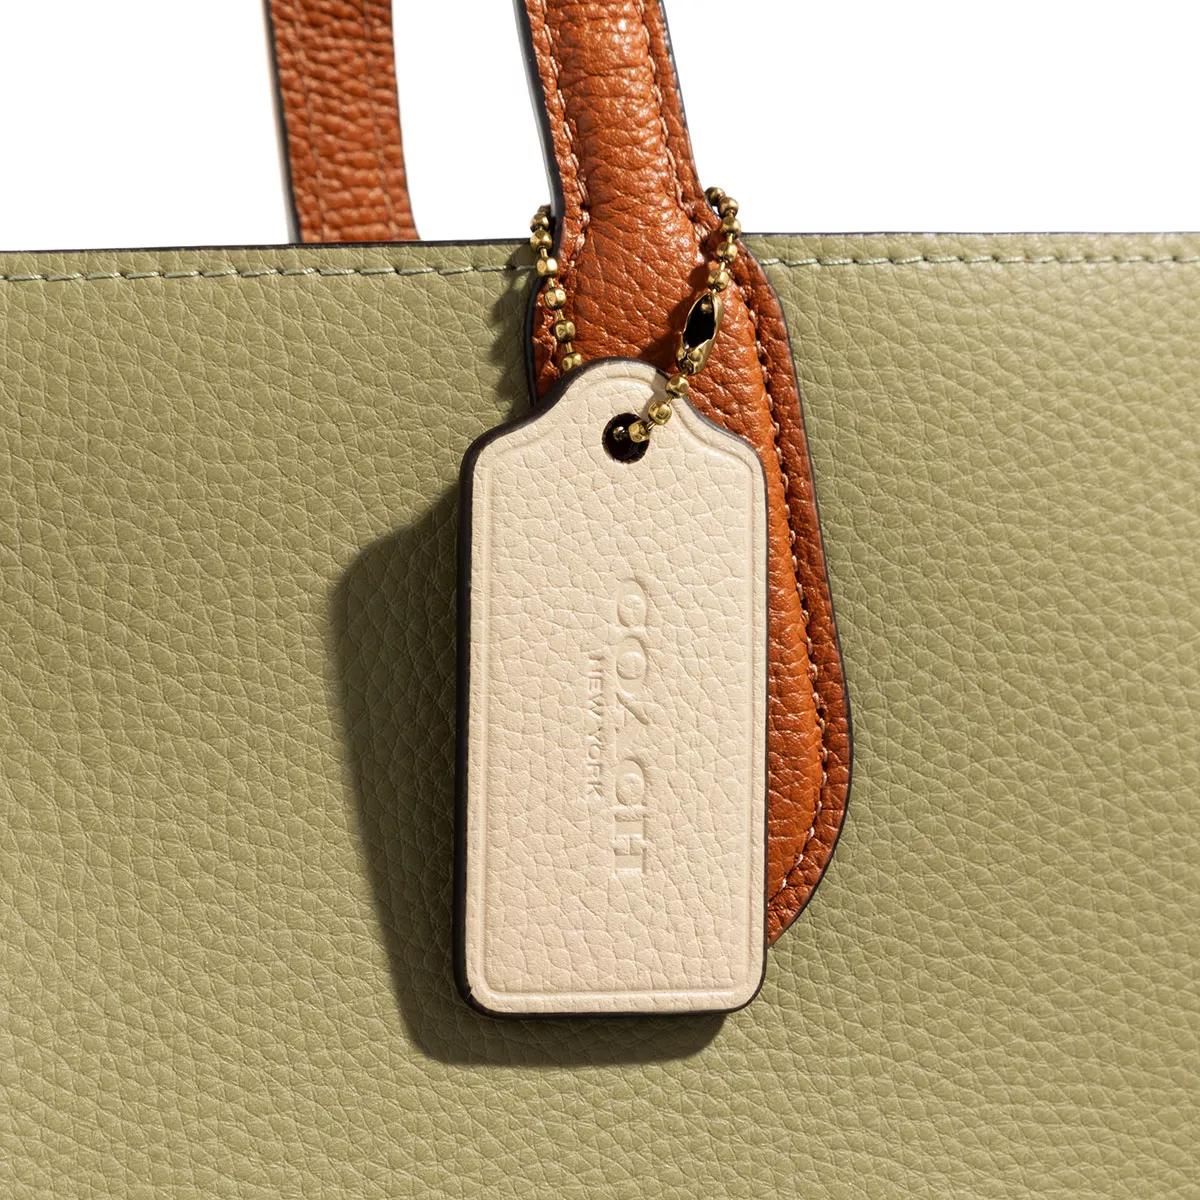 Coach Shoppers Colorblock Leather With Coated Canvas Signature In groen